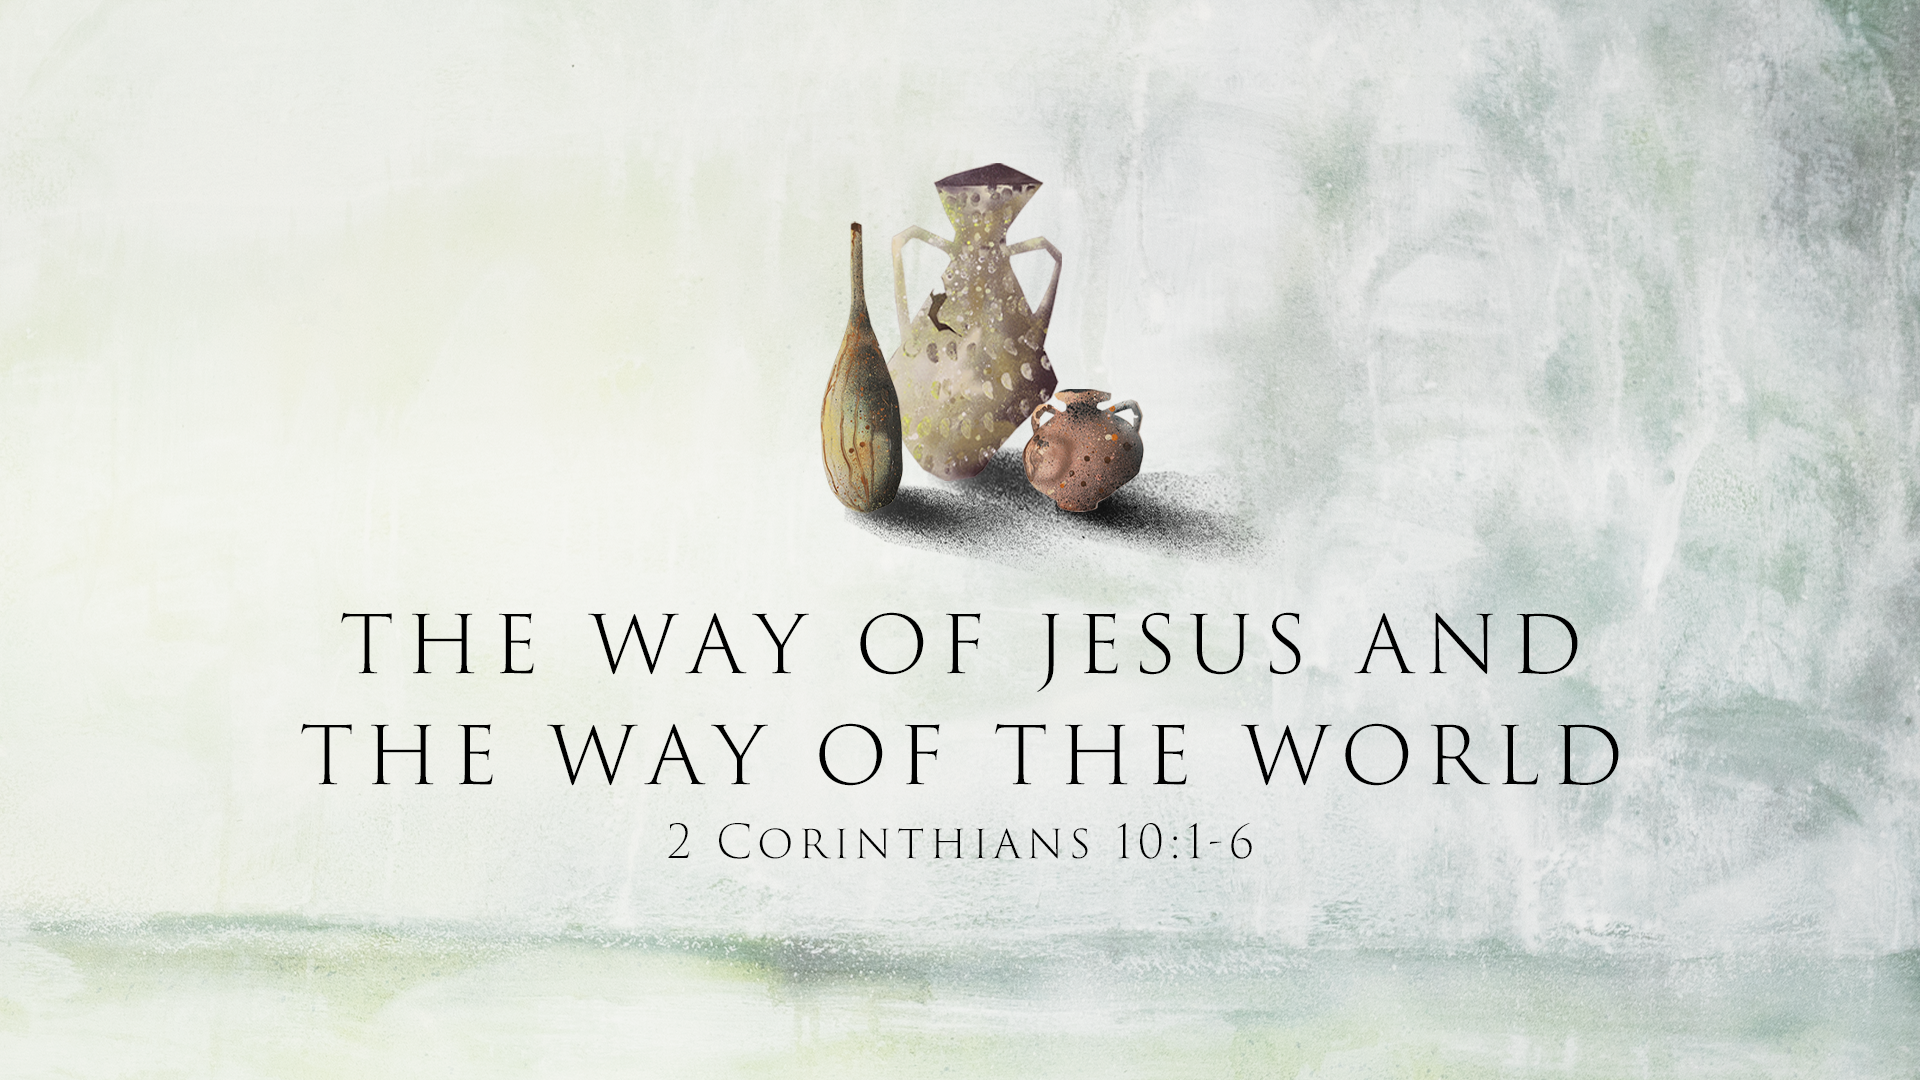 The Way of Jesus and the Way of the World